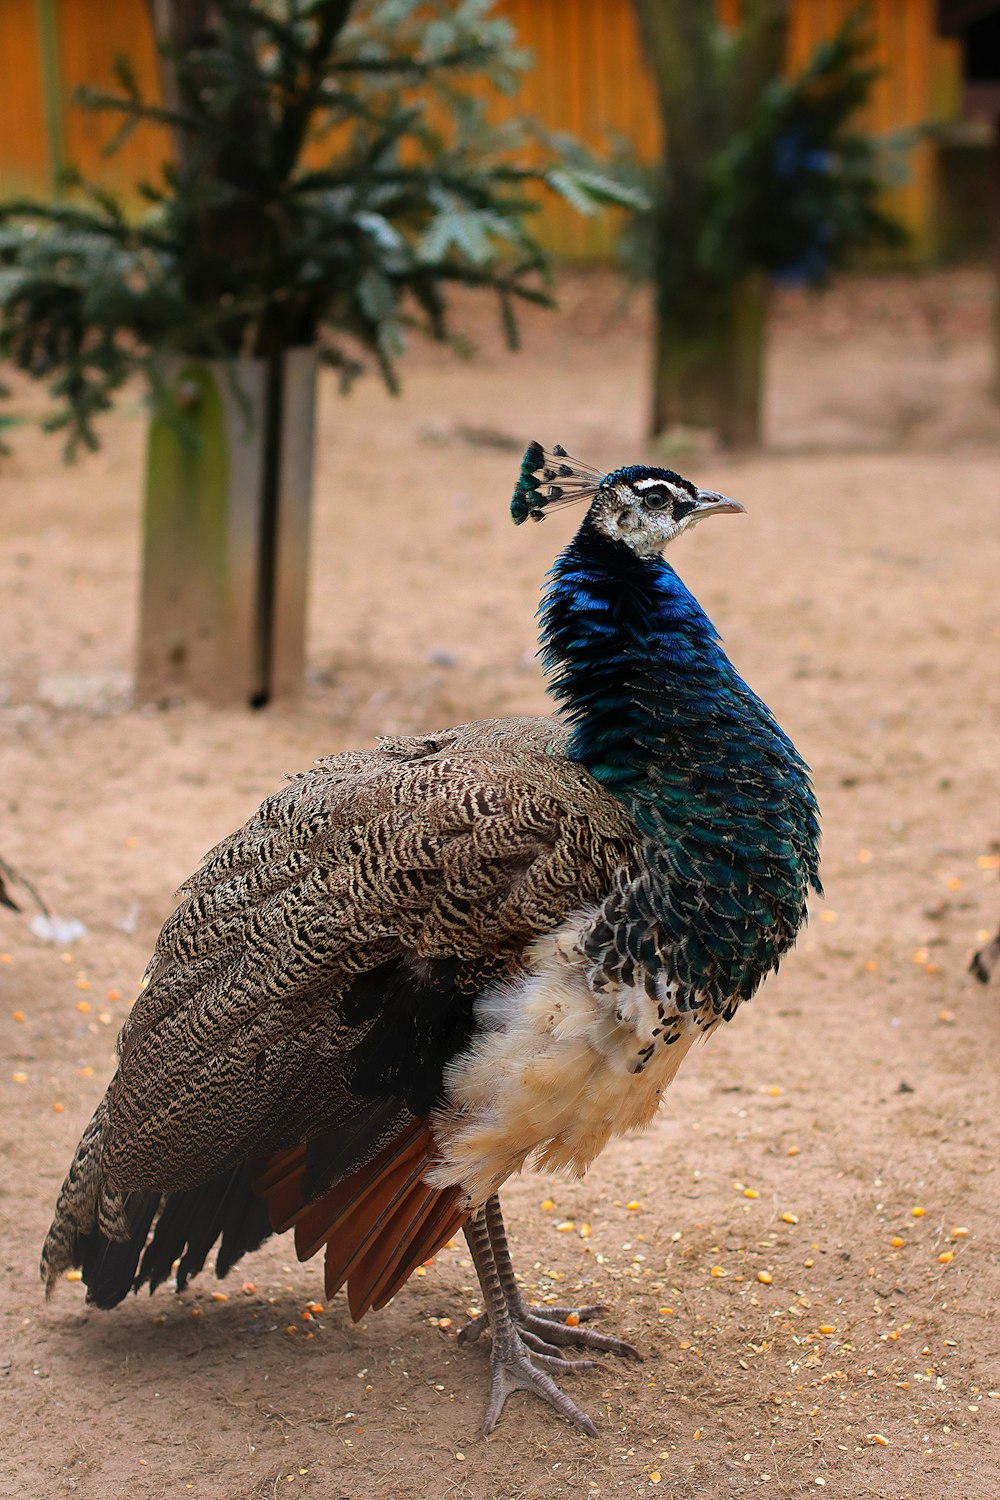 a peacock standing on a dirt ground next to a tree